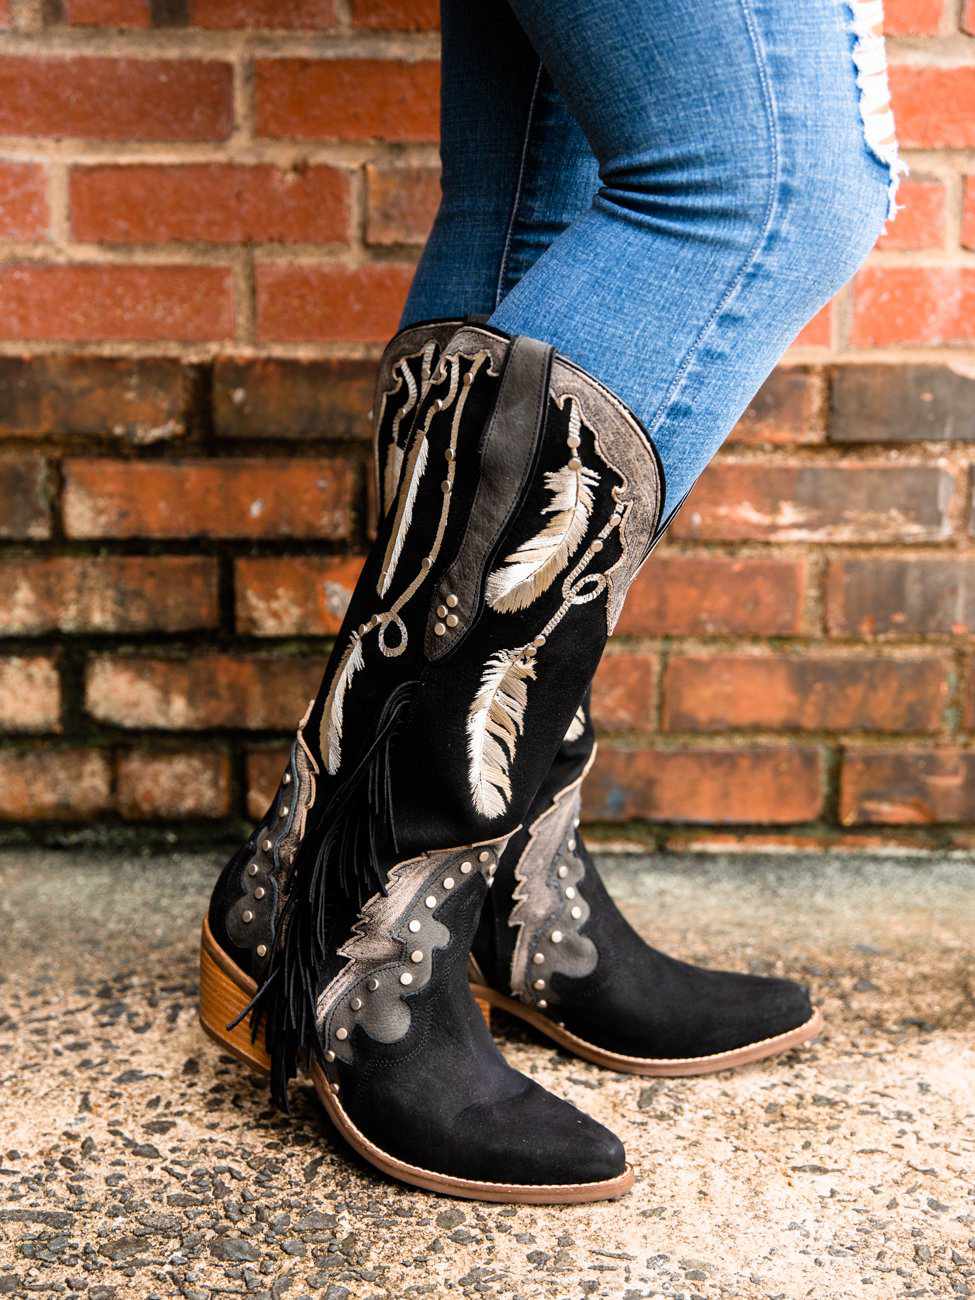 Dream Catcher Boots - Black-Boots-Southern Fried Chics